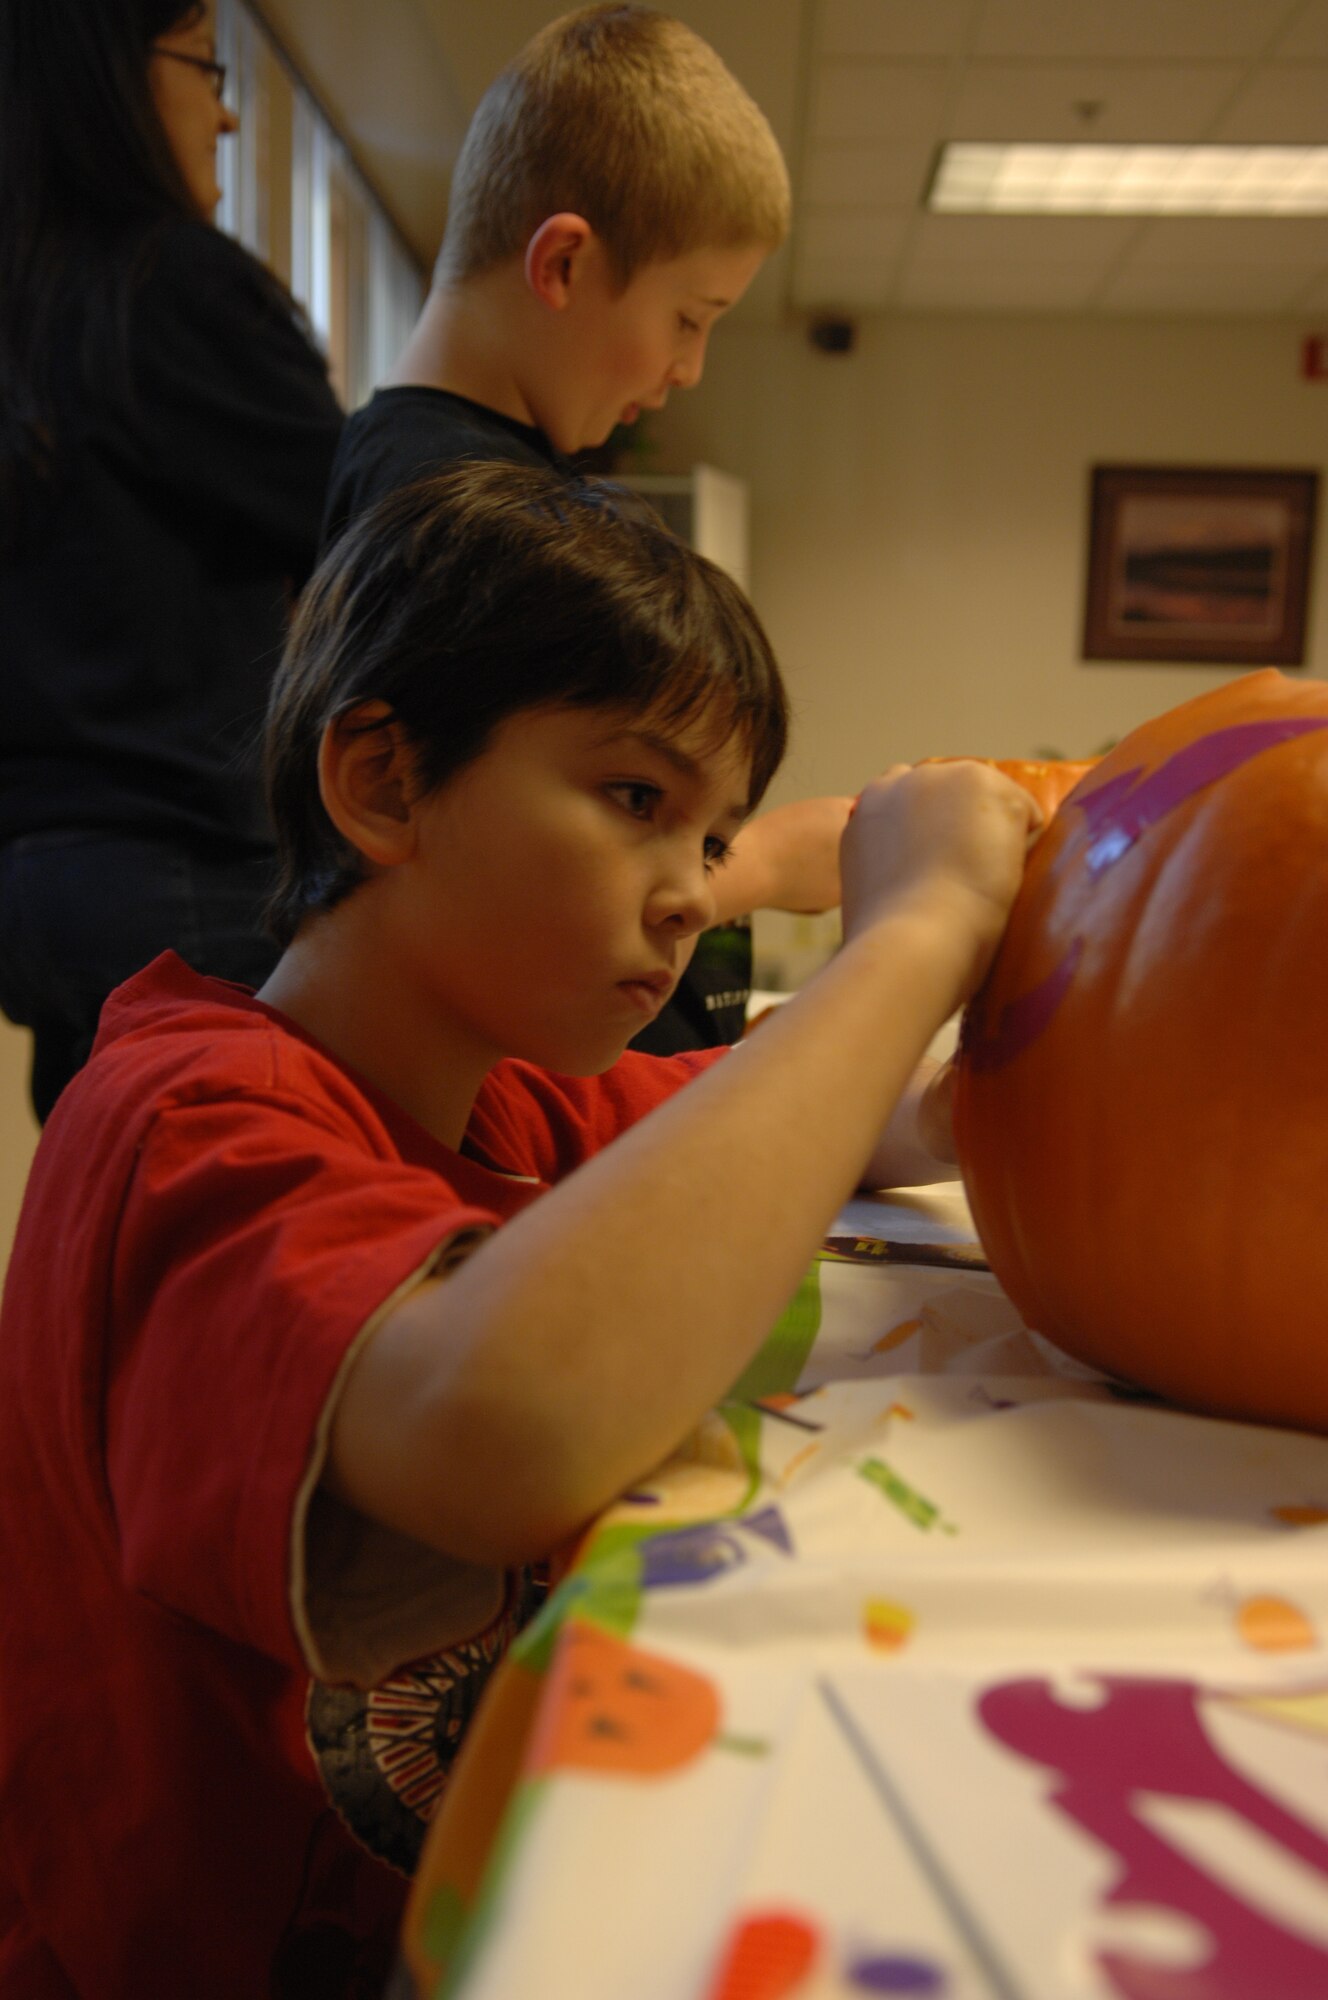 Matthew Smith, son of Master Sgt. Michael Smith, 354th Civil Engineer Squadron, carves a pumpkin during a class at the Airman and Family Readiness Center Oct. 30, 2009, Eielson Air Force Base, Alaska. The pumpkin carving class is one of the many classes that the Airmen and Family Readiness Center offers for Airmen and their families. (U.S. Air Force photo/Airman 1st Class Rachelle Coleman)